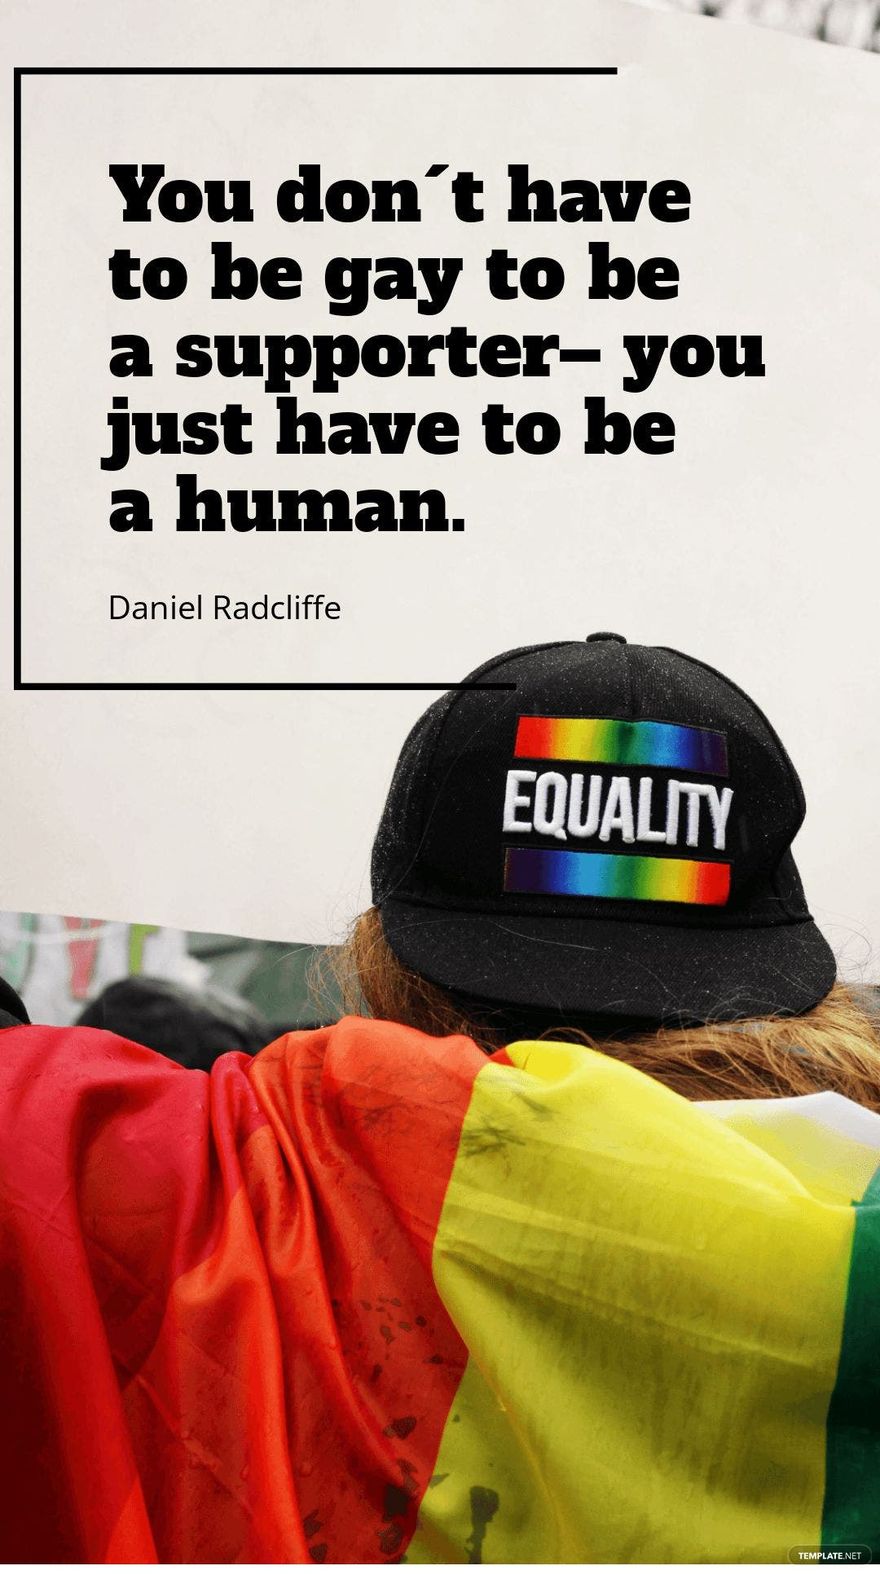 Daniel Radcliffe - You don´t have to be gay to be a supporter – you just have to be a human. in JPG